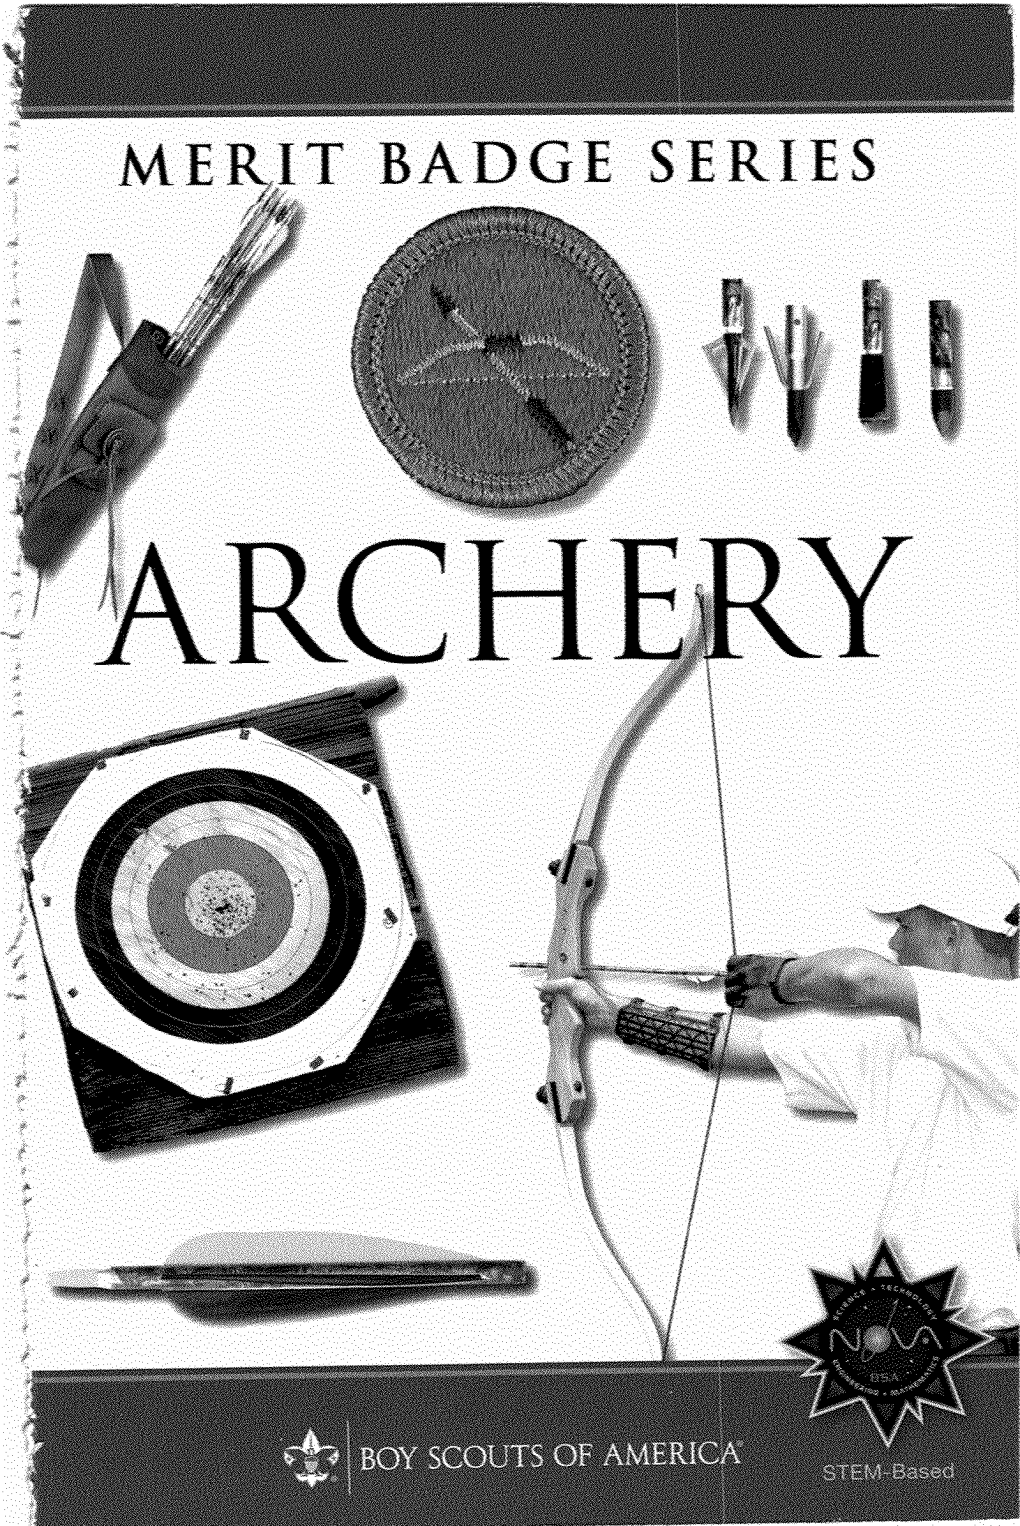 Scoring USA Archery and NFAA Targets